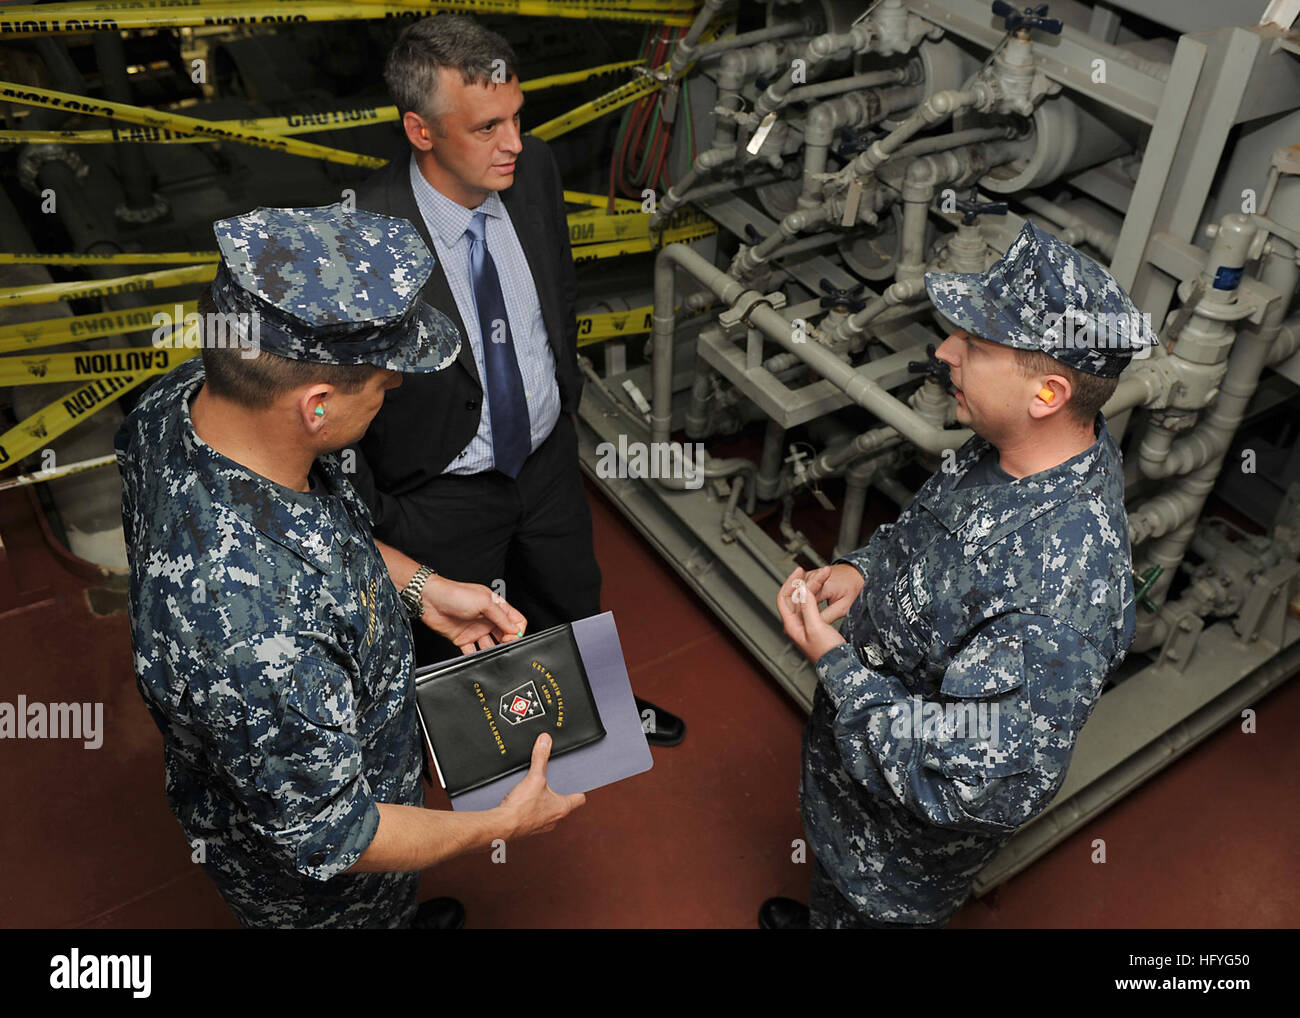 101108-N-1947A-008 SAN DIEGO (Nov. 8, 2010) Deputy Assistant Secretary of the Navy for Energy Thomas Hicks speaks with Capt. Jim Landers, commanding officer of the amphibious assault ship USS Makin Island (LHD 8), and Gas Turbine System Technician (Mechanical) 1st Class Nicholas Ayres during a tour of the shipÕs main machinery room. Makin Island, the NavyÕs first operational hybrid-electric amphibious assault ship, is expected to save the Navy $250 million throughout its 40-year life cycle. (U.S. Navy photo by Mass Communication Specialist 2nd Class Kellie Abedzadeh/Released) US Navy 101108-N- Stock Photo